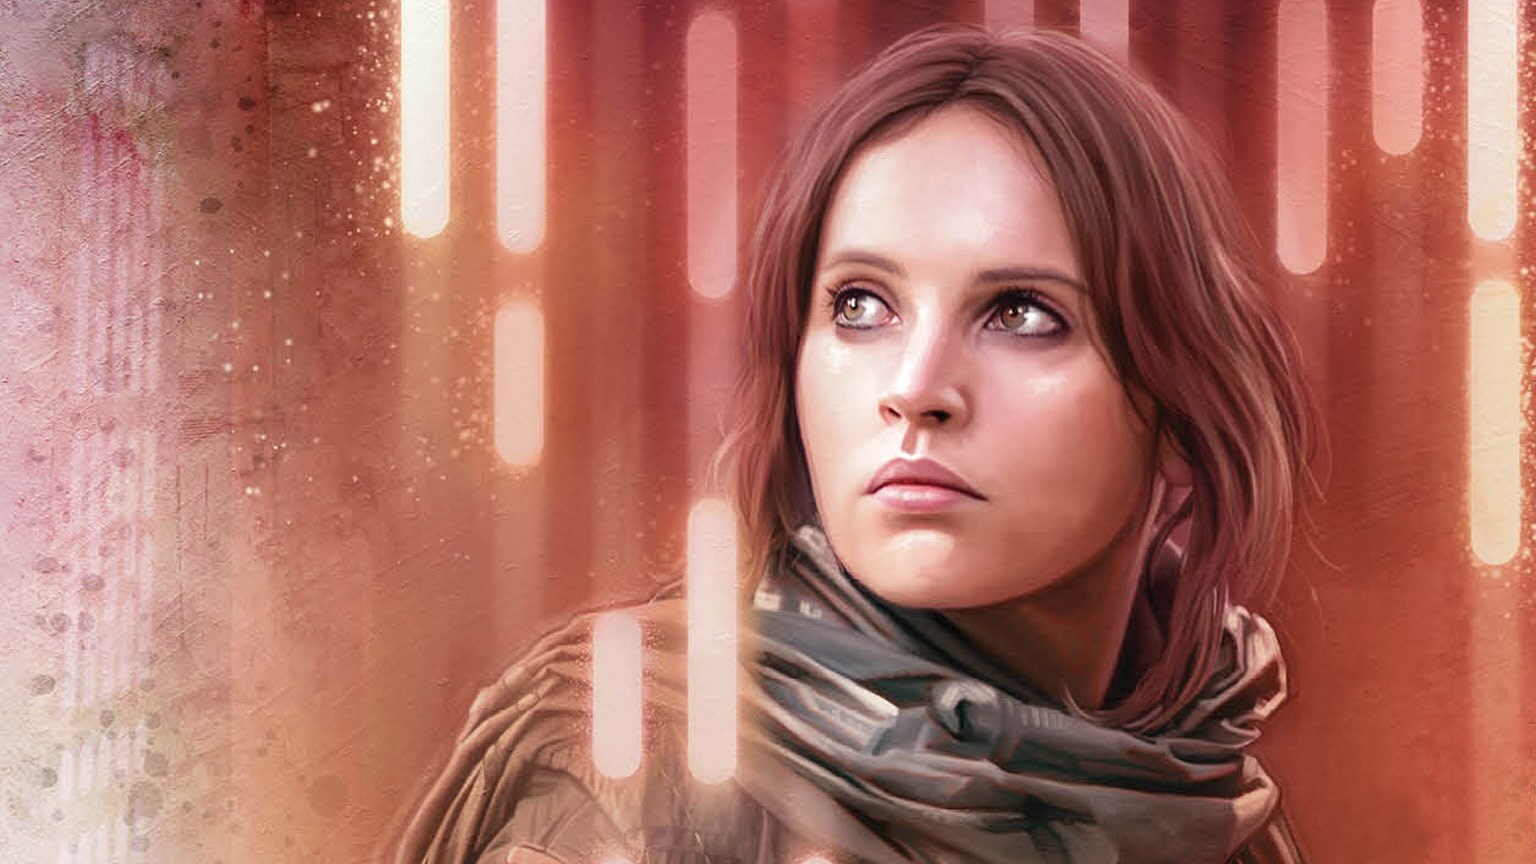 Jyn Erso's Future Unfolds in Rebel Rising - Exclusive Excerpt